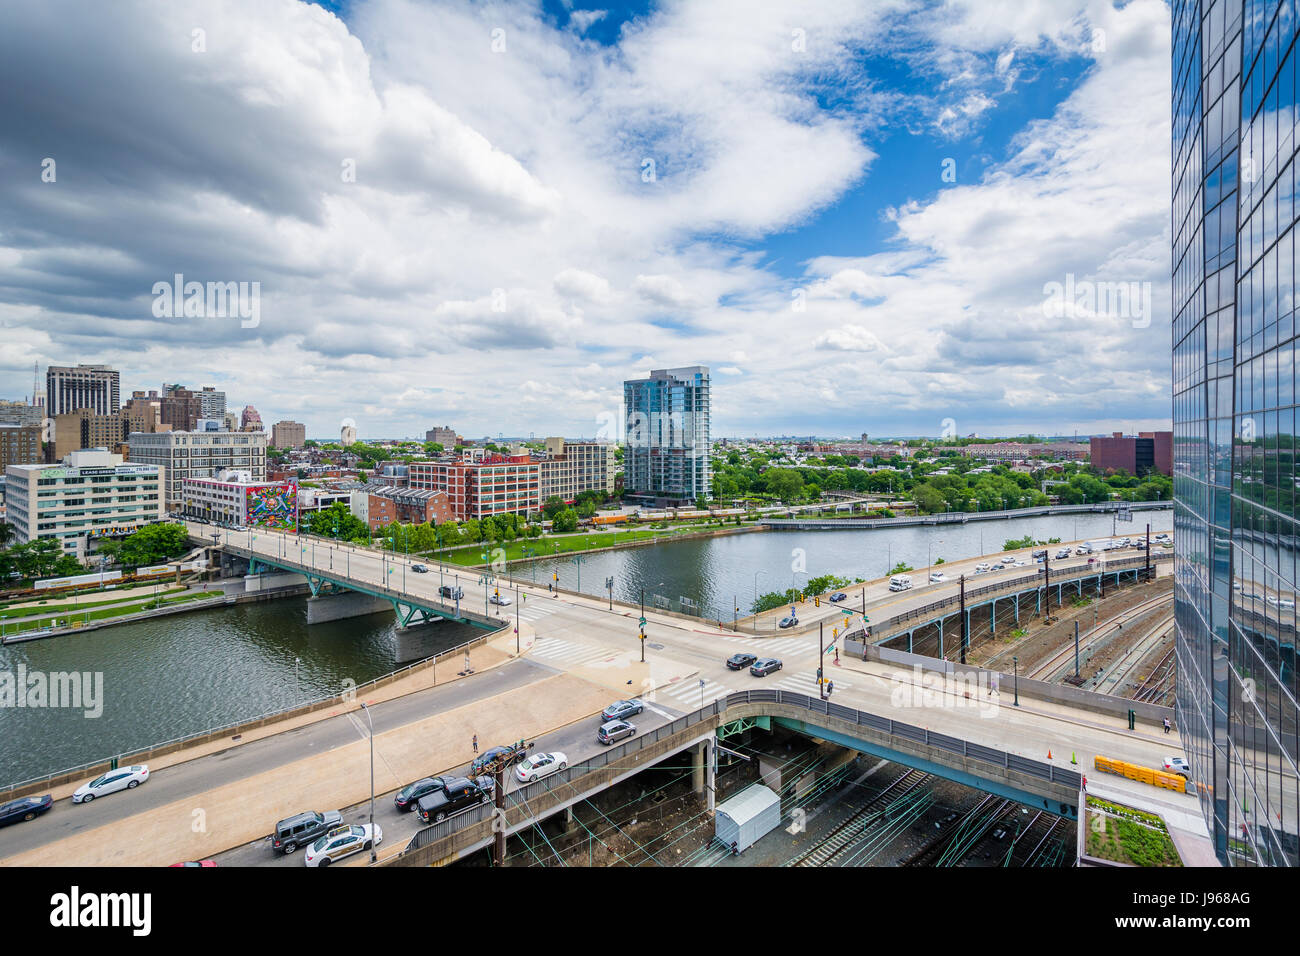 View of streets and railroad tracks along the Schuylkill River in Philadelphia, Pennsylvania. Stock Photo